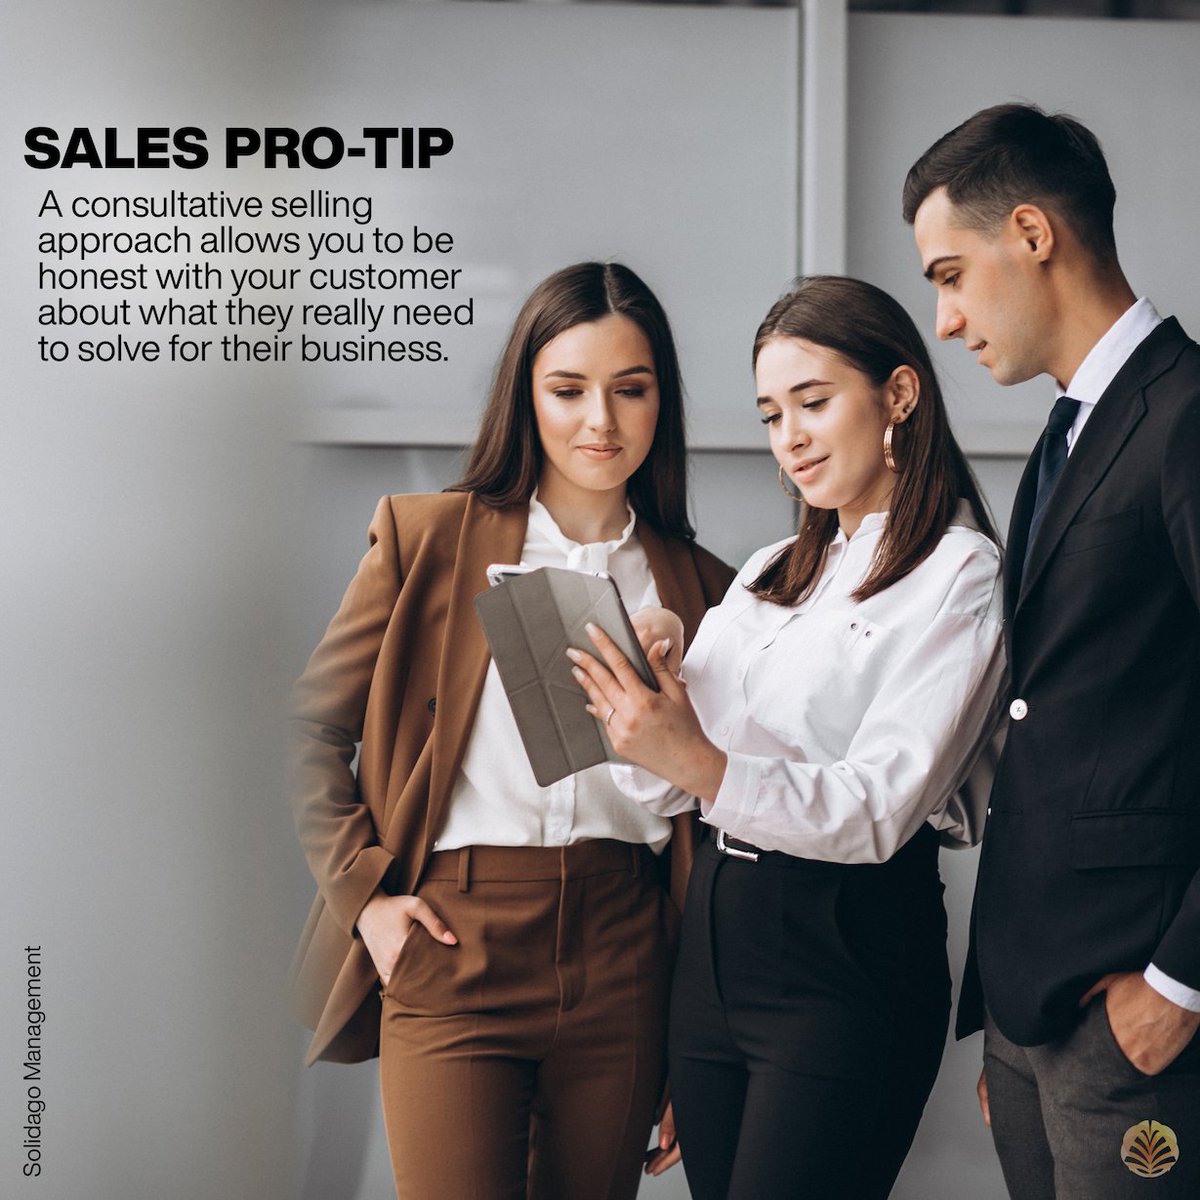 Consultative selling creates opportunity to share knowledge with your customers and help them find real solutions. When your customers succeed, it comes back to you in the form of renewals and referrals! #protips #salesknowledge